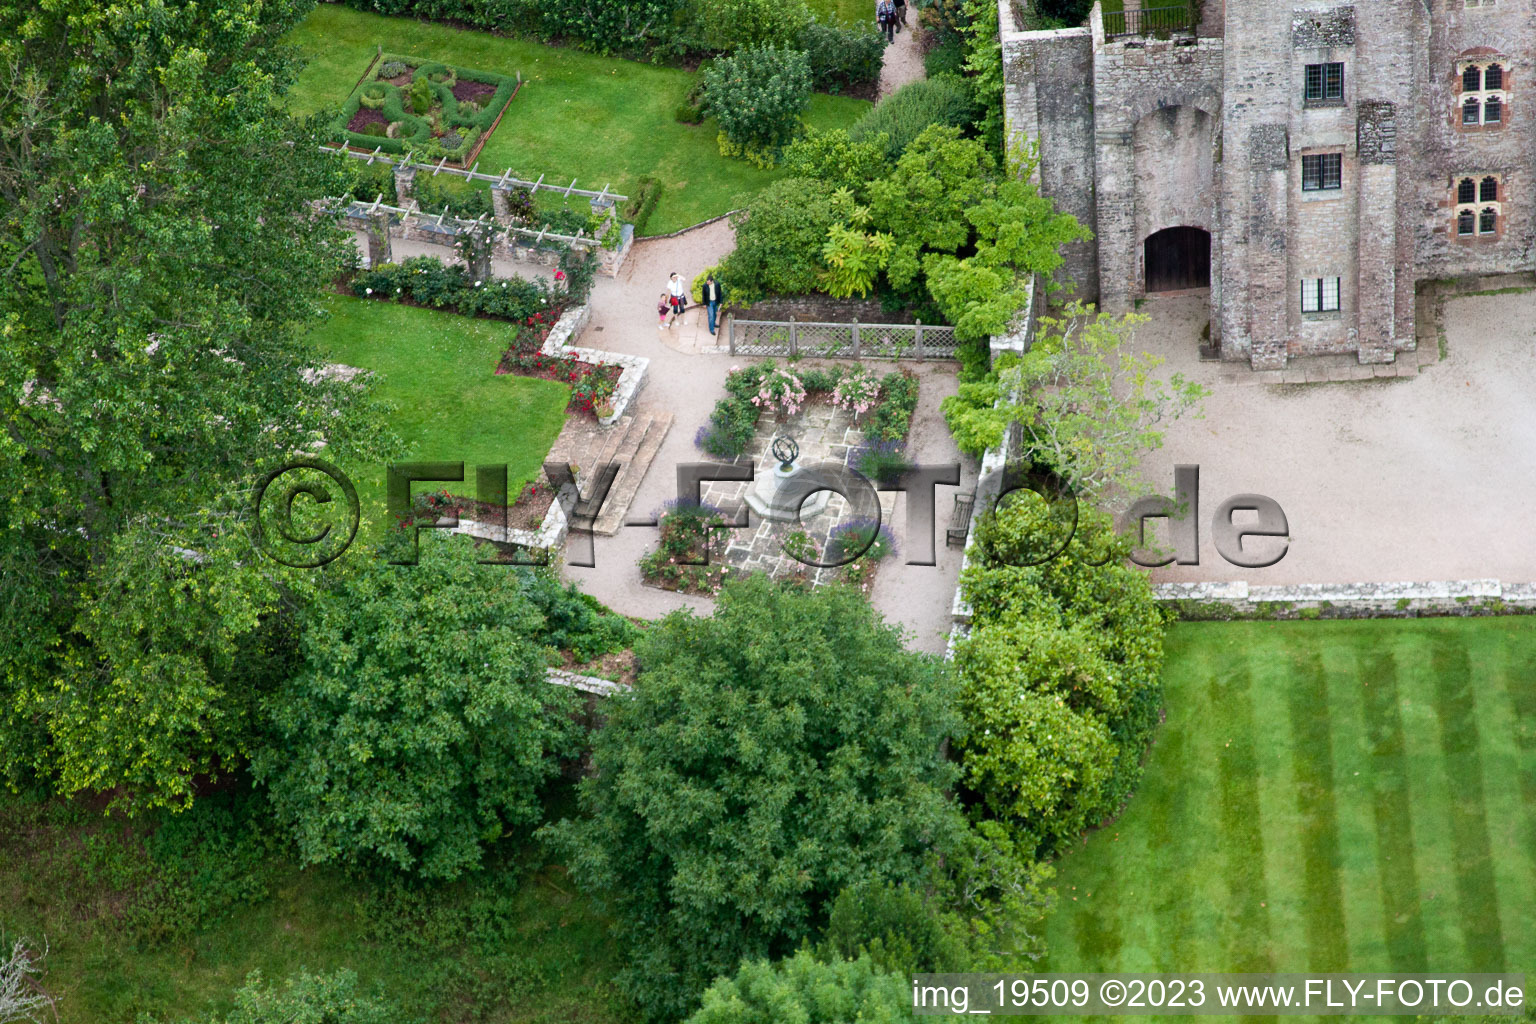 Bird's eye view of Marldon in the state England, Great Britain